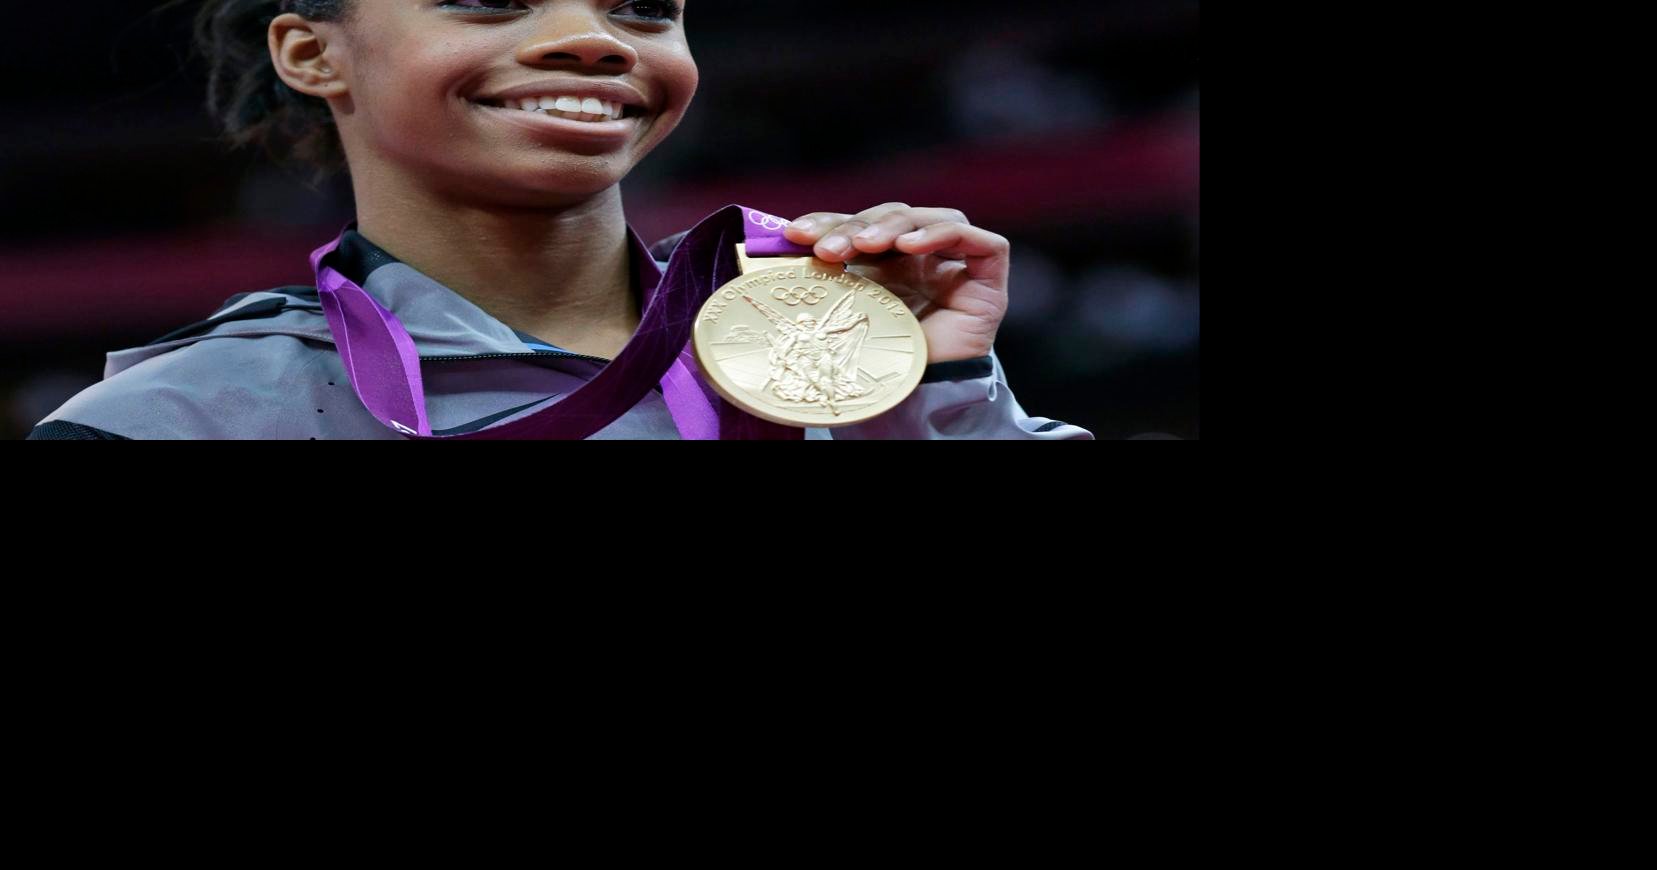 Olympic gymnastics champion Gabby Douglas says she is aiming for the